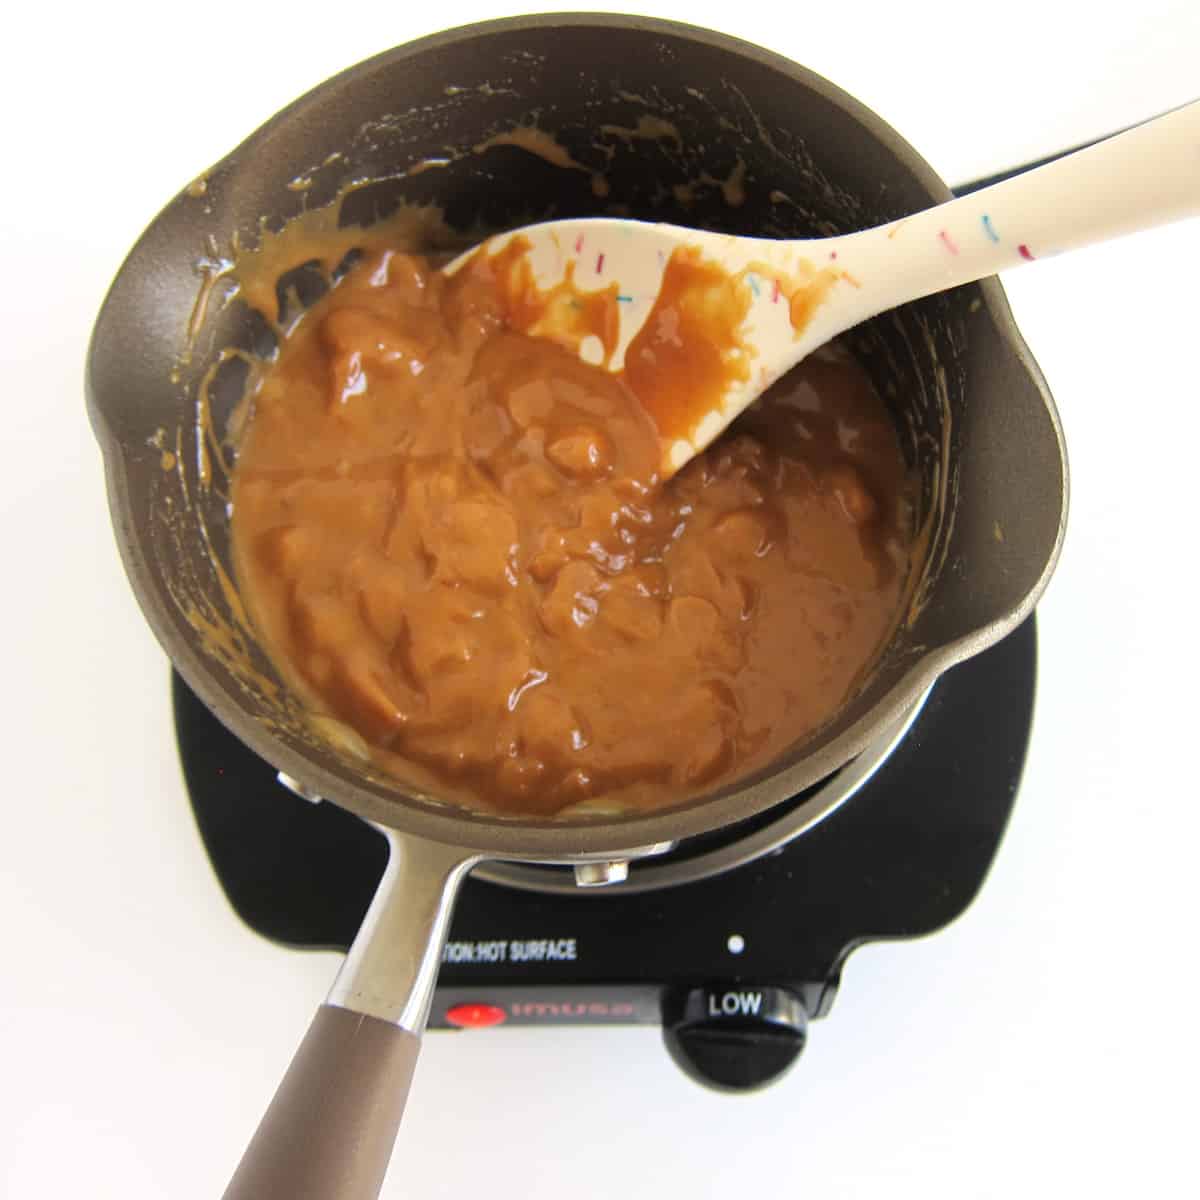 caramel bits and heavy whipping cream melting in saucepan